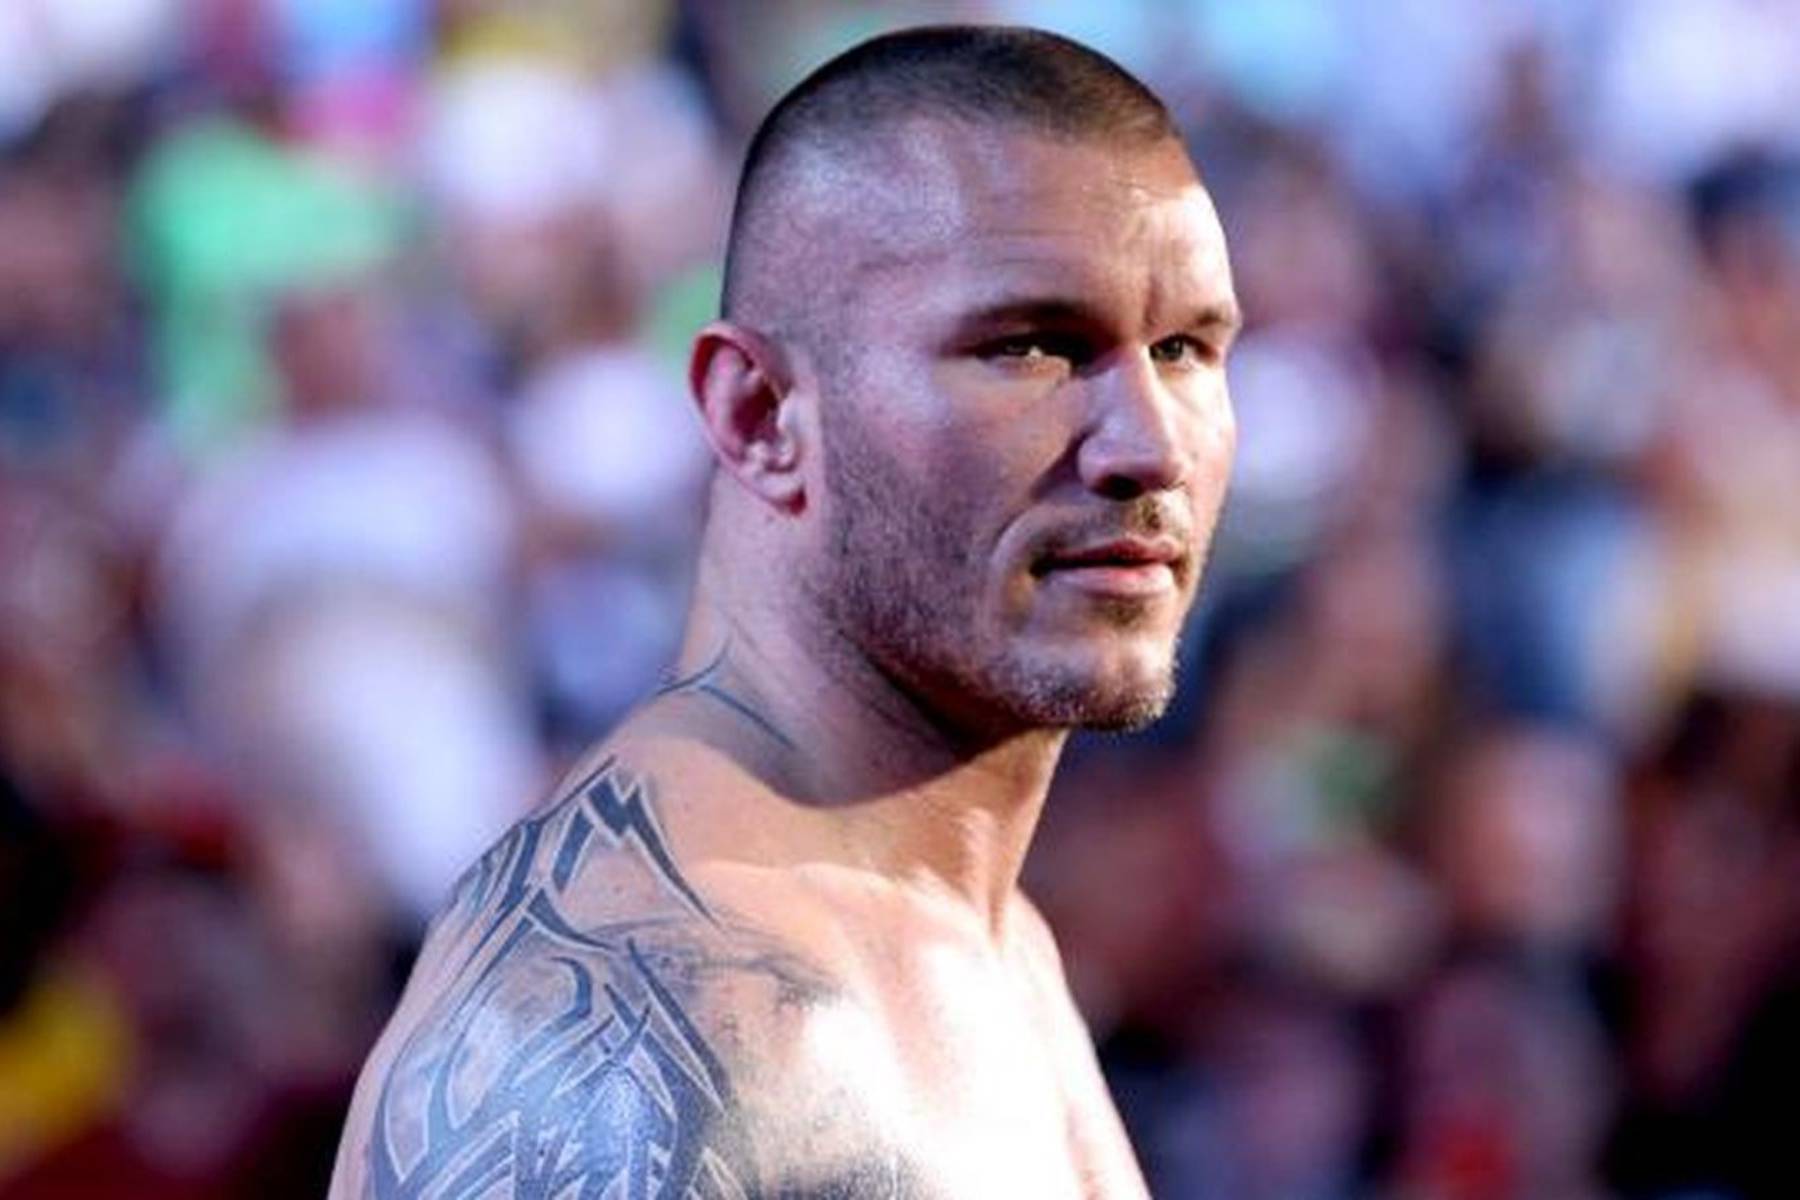 Randy Orton Wallpapers Images Photos Pictures Backgrounds1800 x 1200